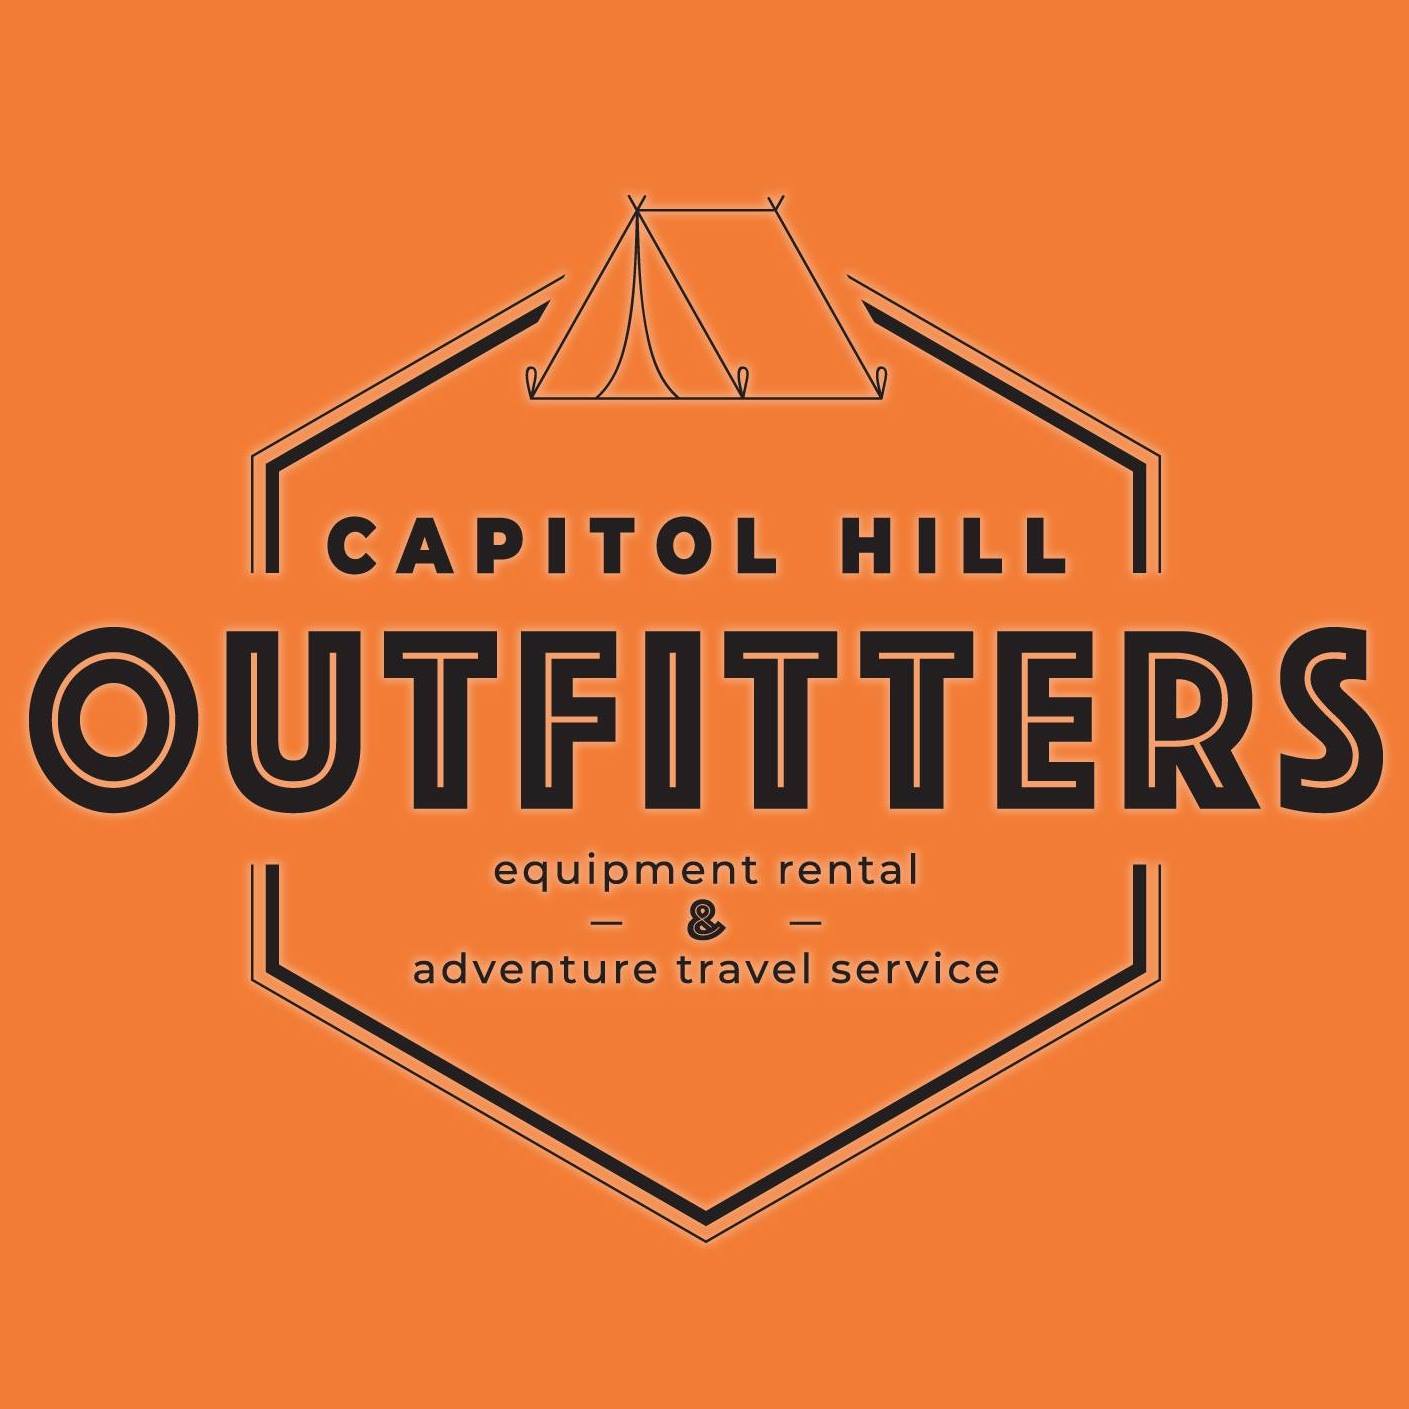 Capitol Hill Outfitters